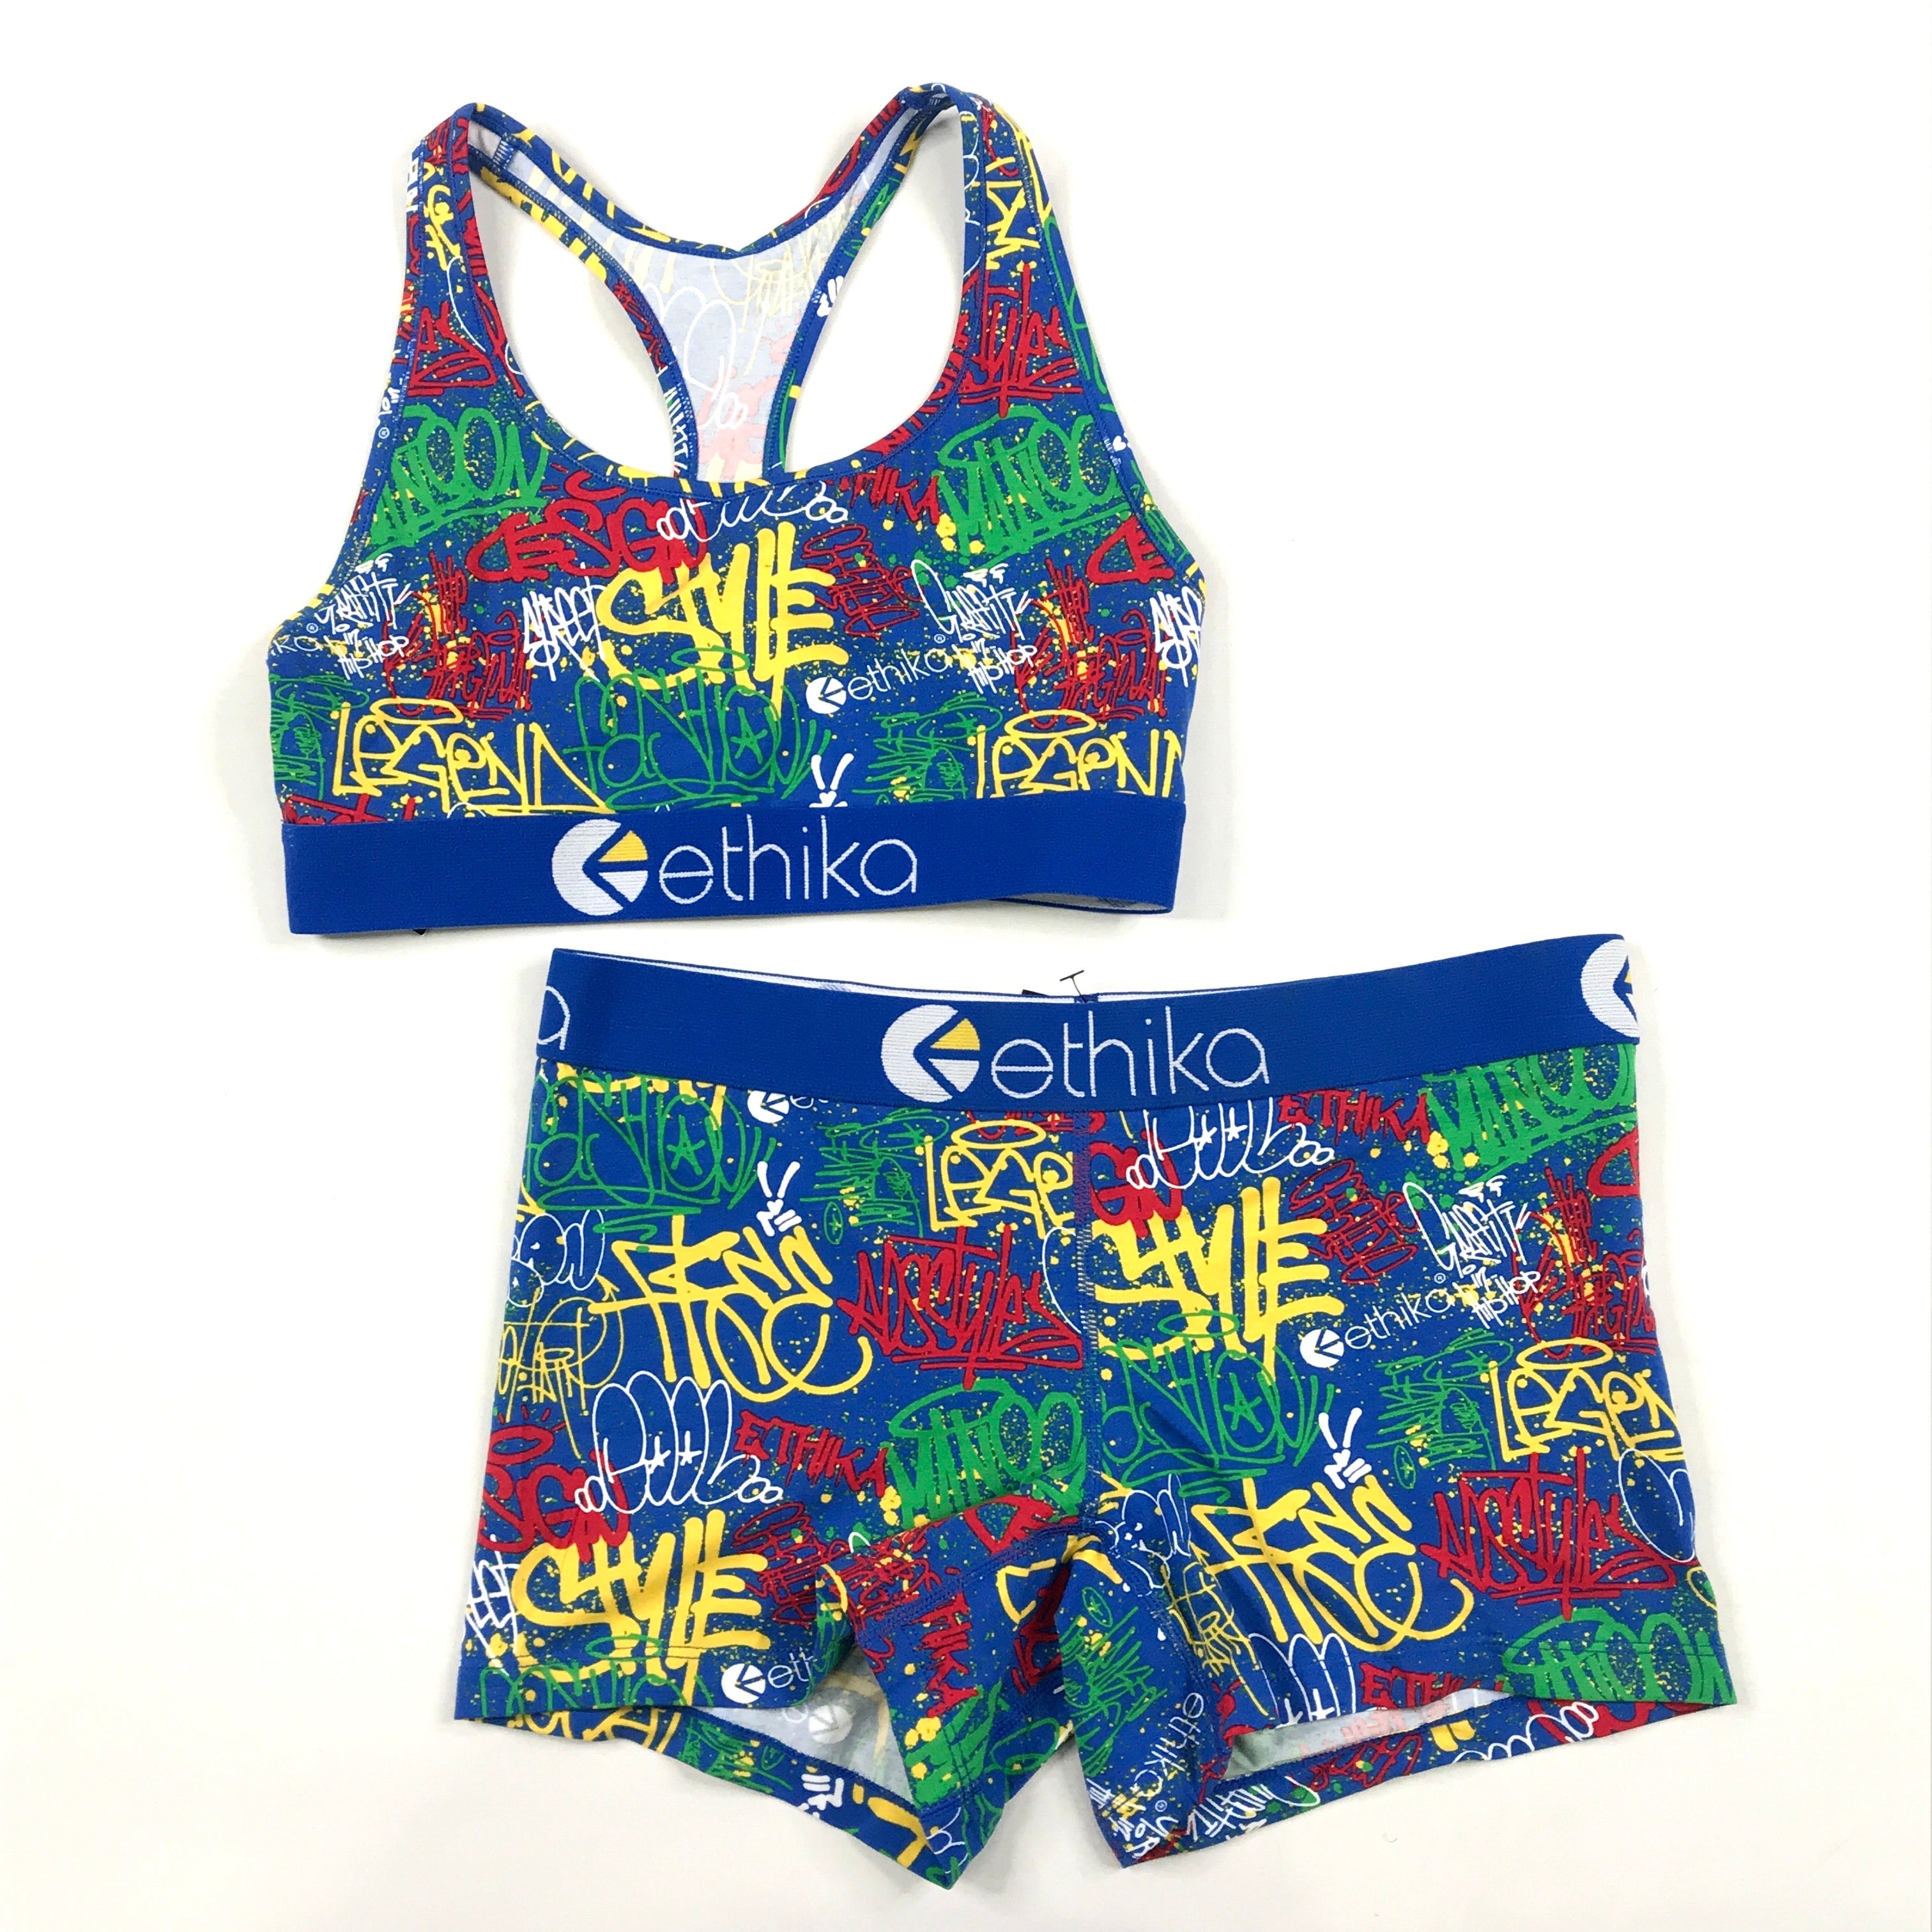 Ethika Staple boxer brief and sports bra set in Expression Session